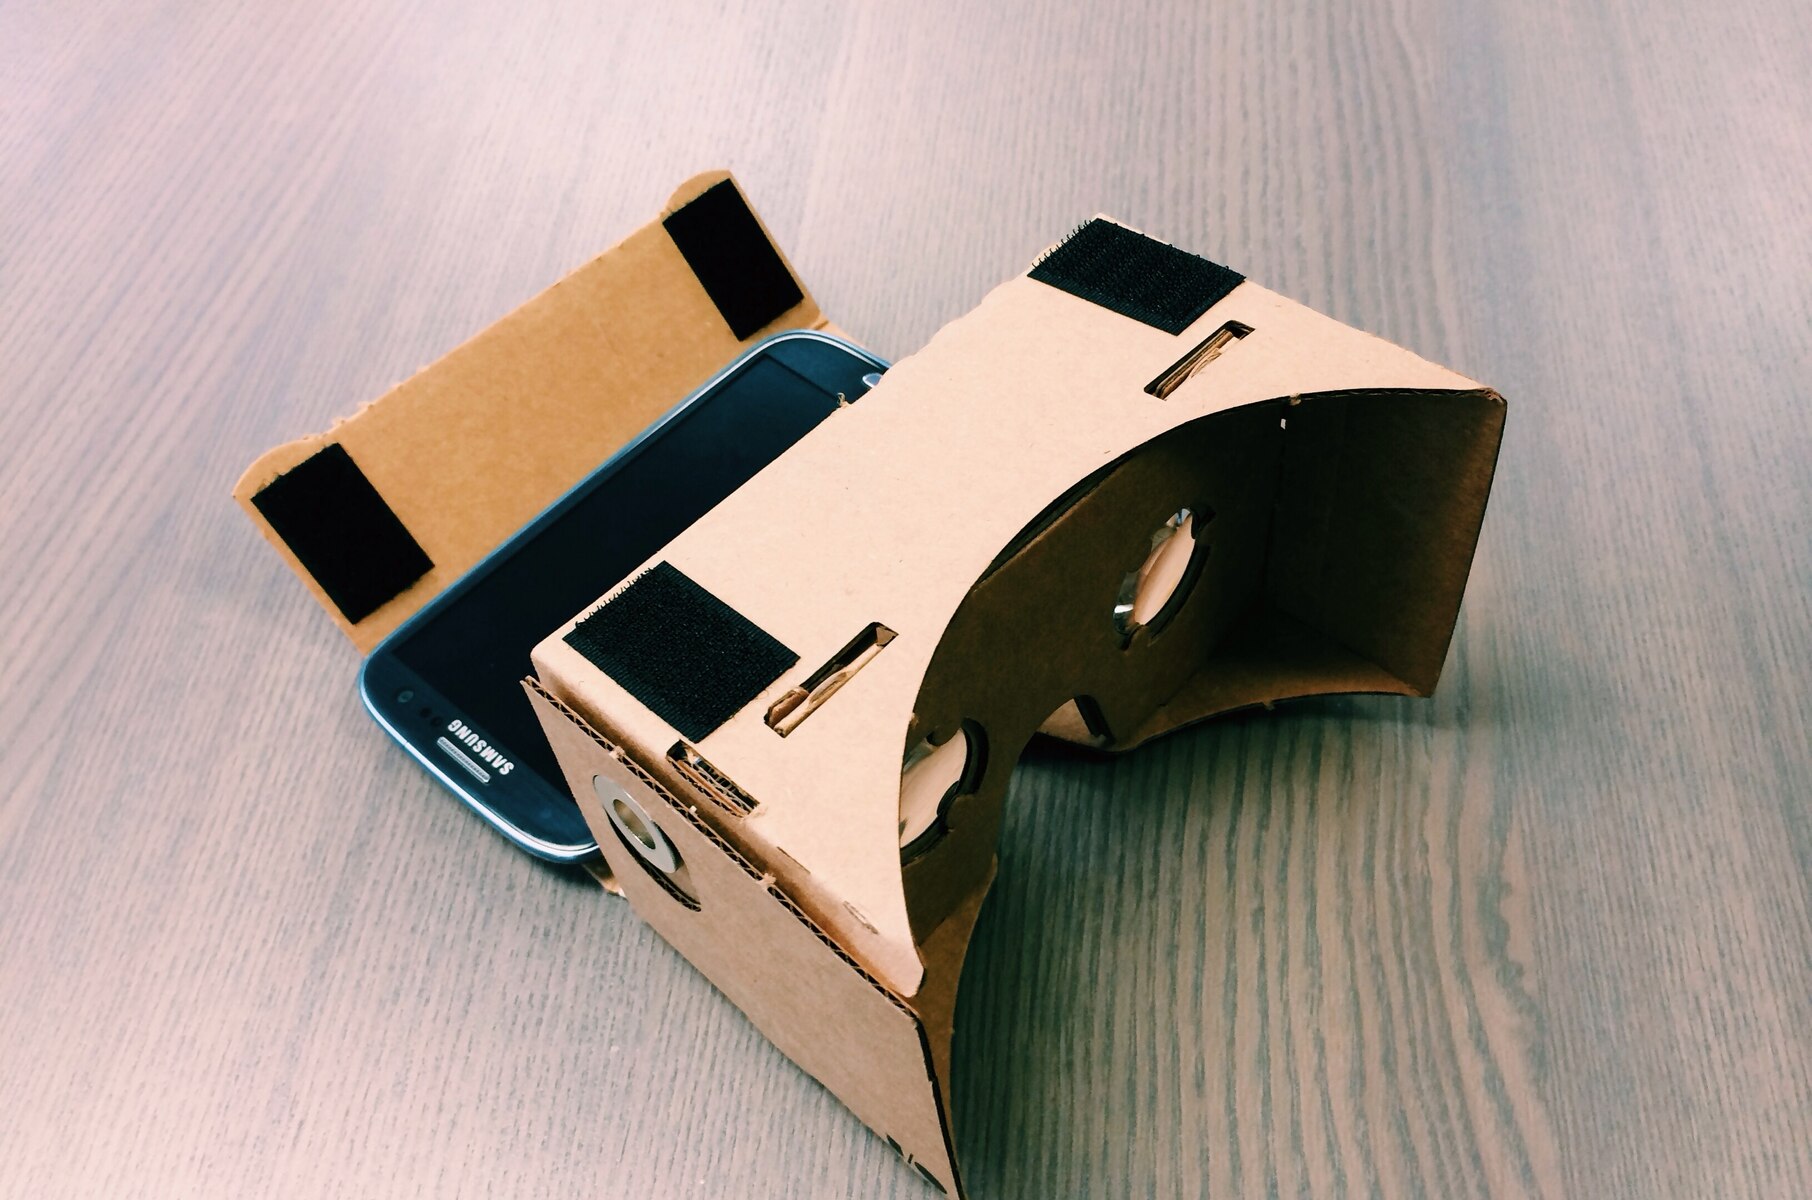 How To Make A VR Headset For Phone